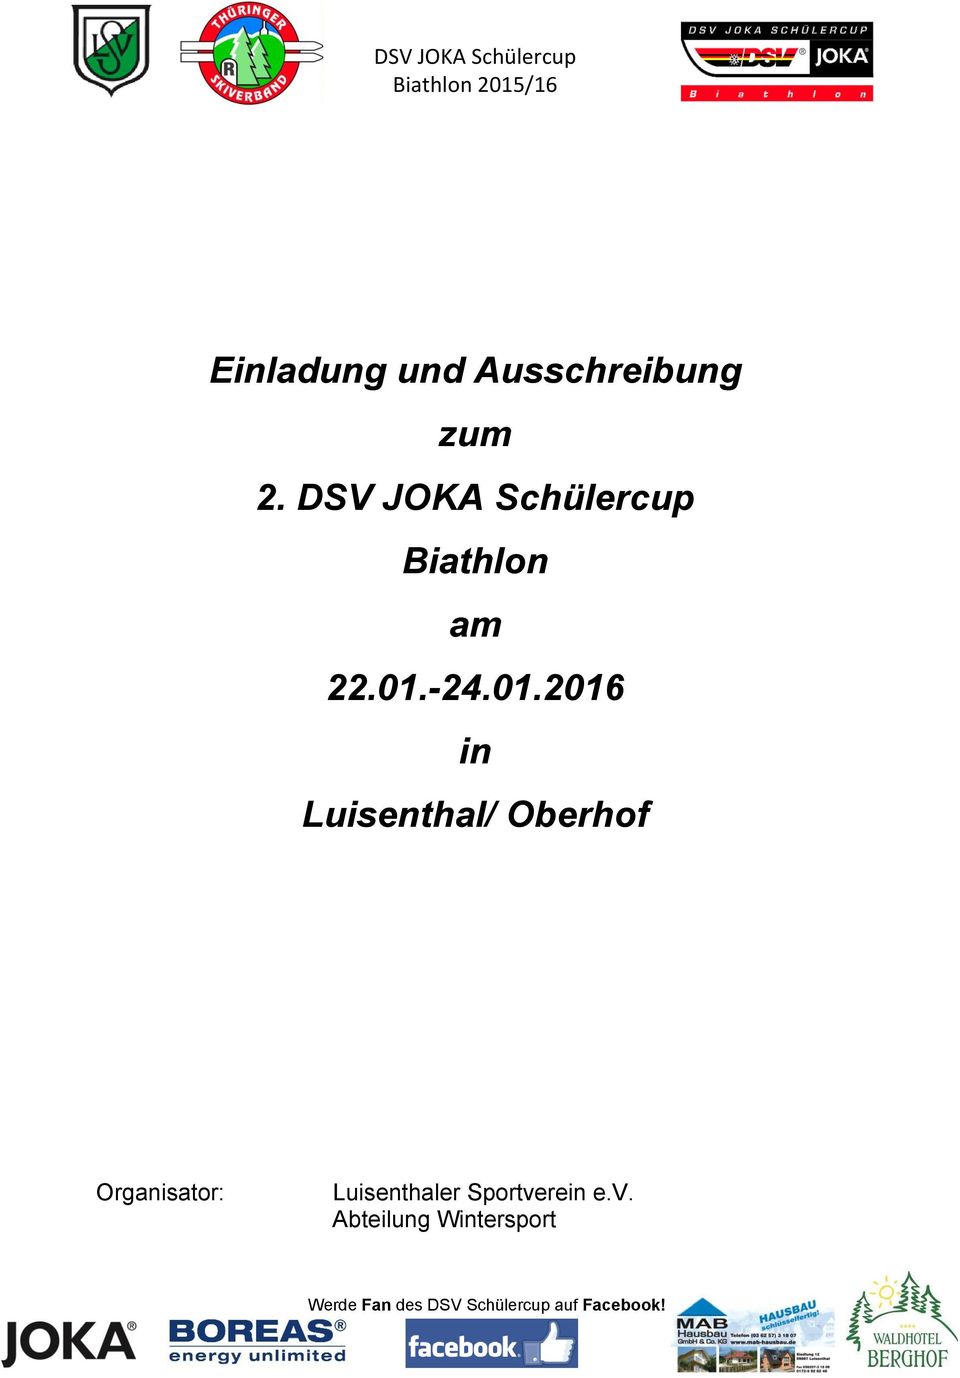 01.-24.01.2016 in Luisenthal/